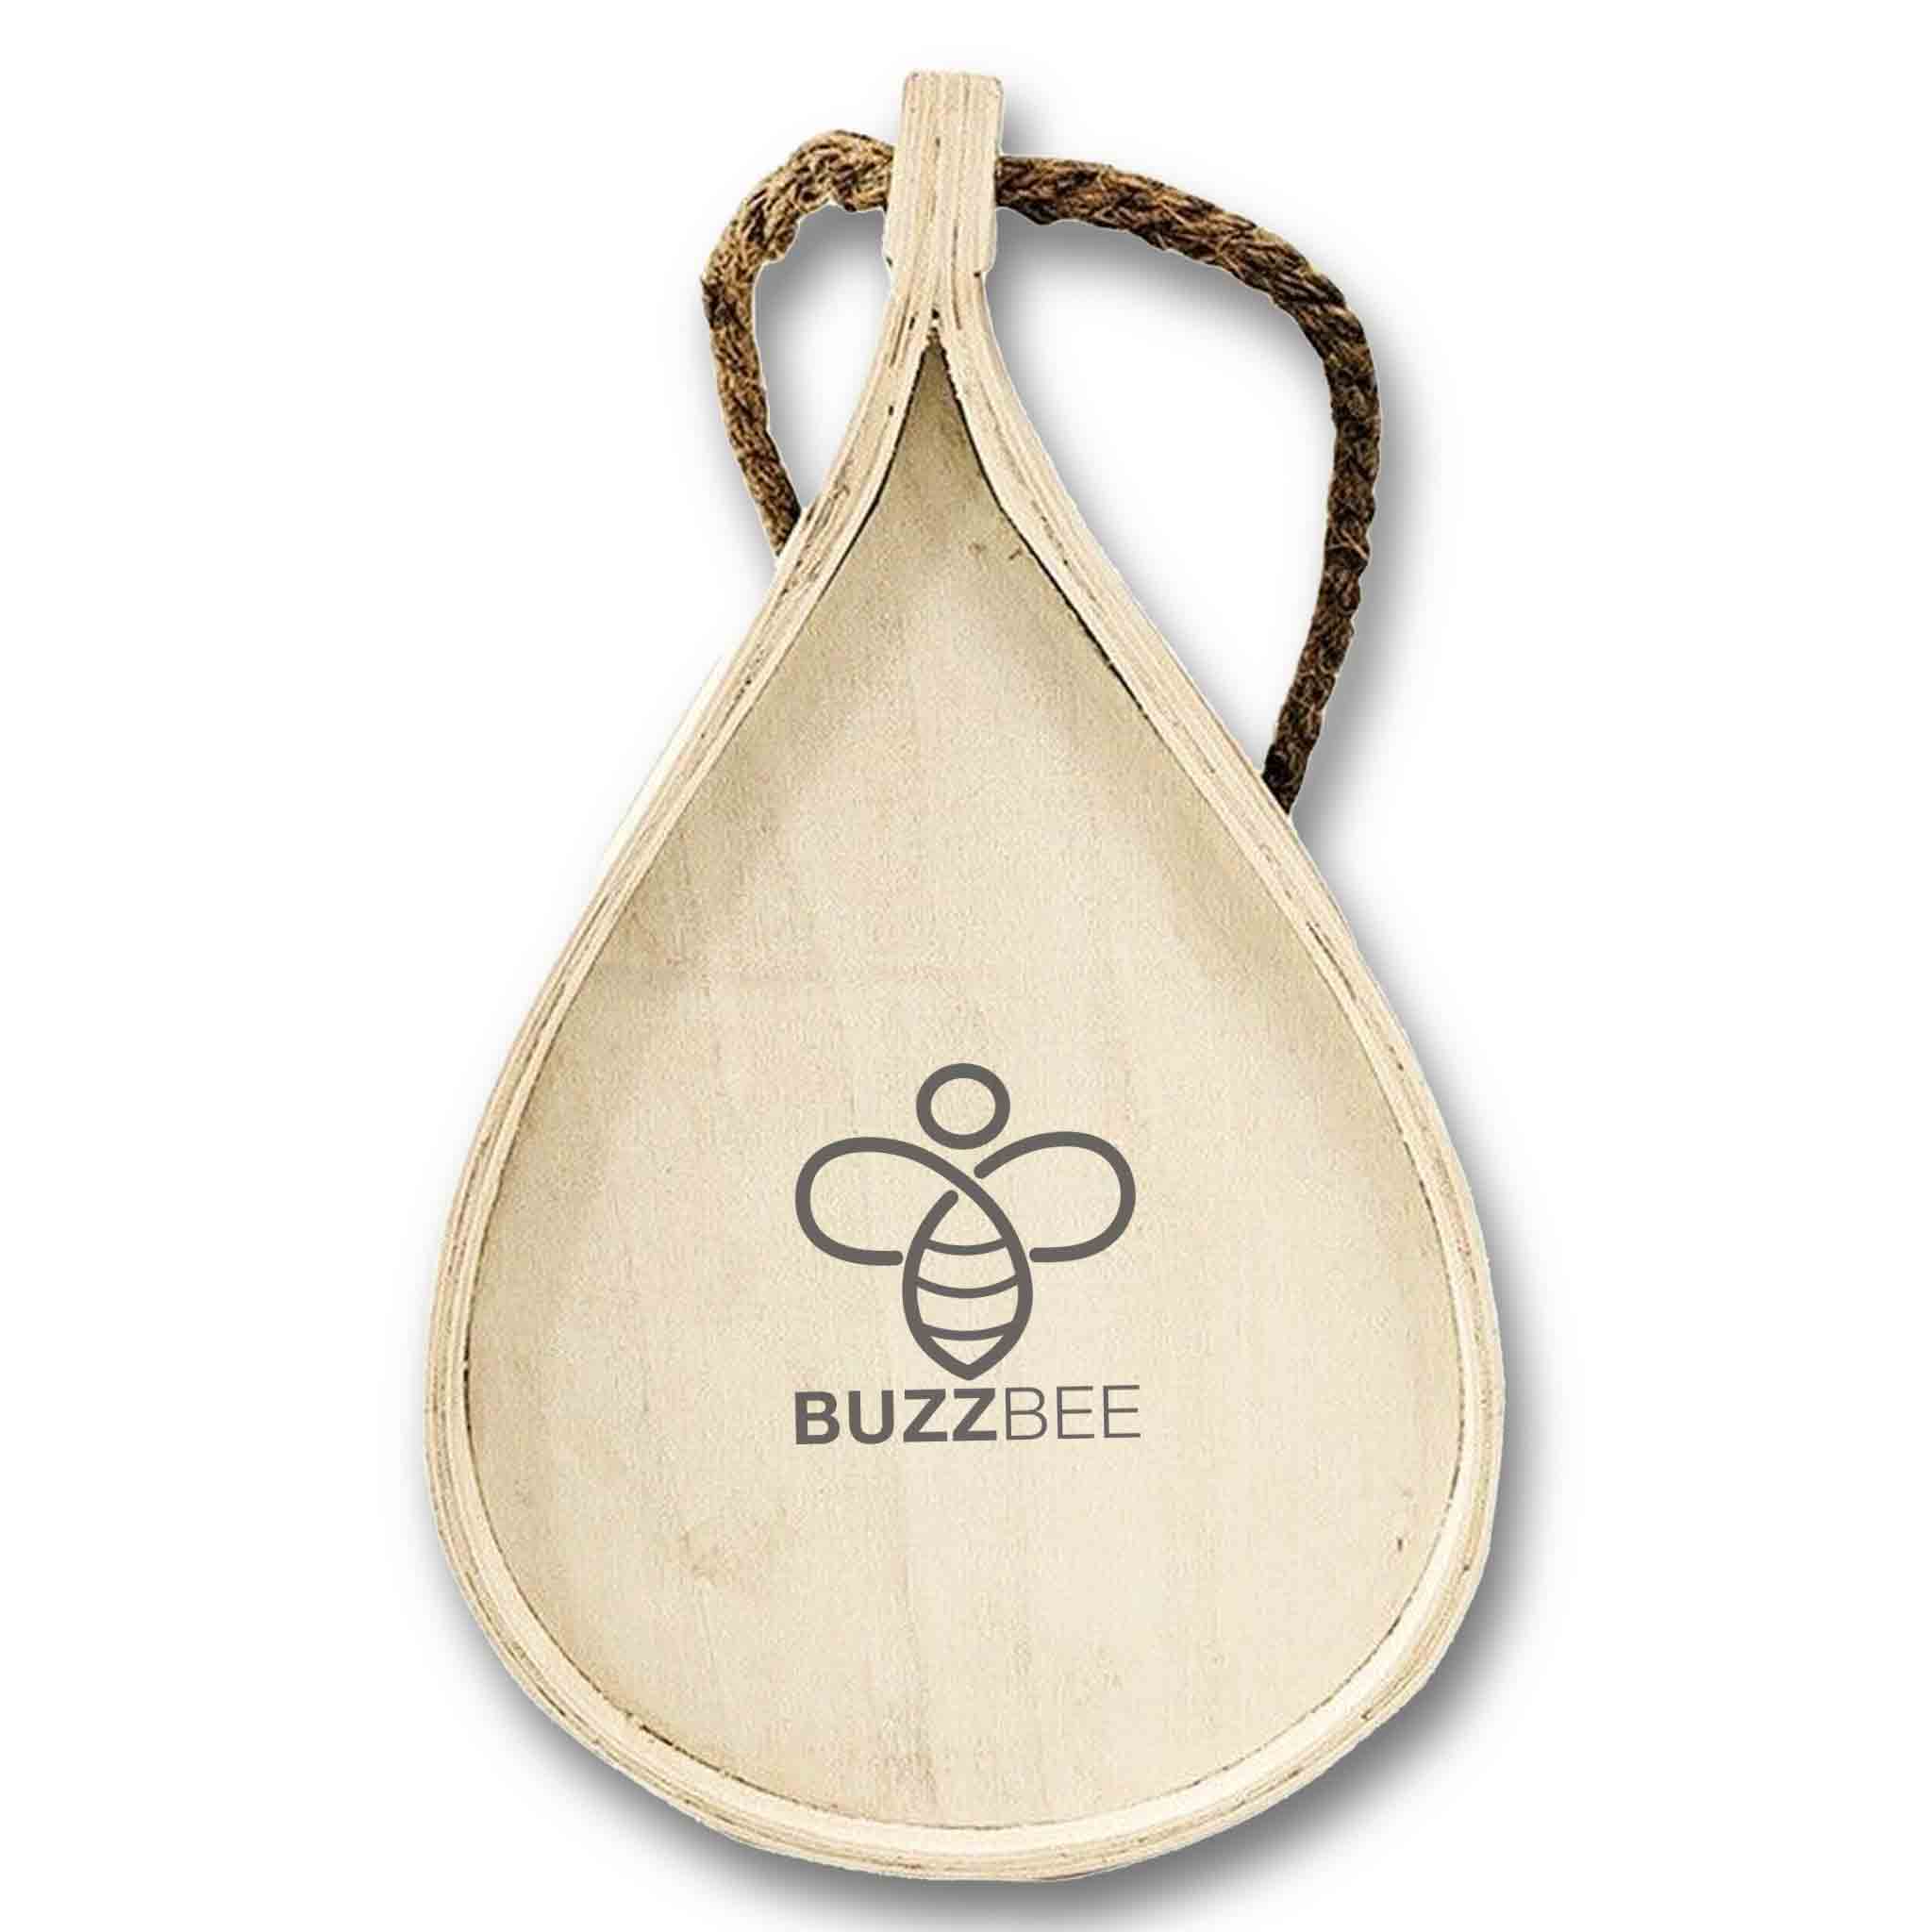 Buzzbee Mason Hive for Native Bees - Hives collection by Buzzbee Beekeeping Supplies